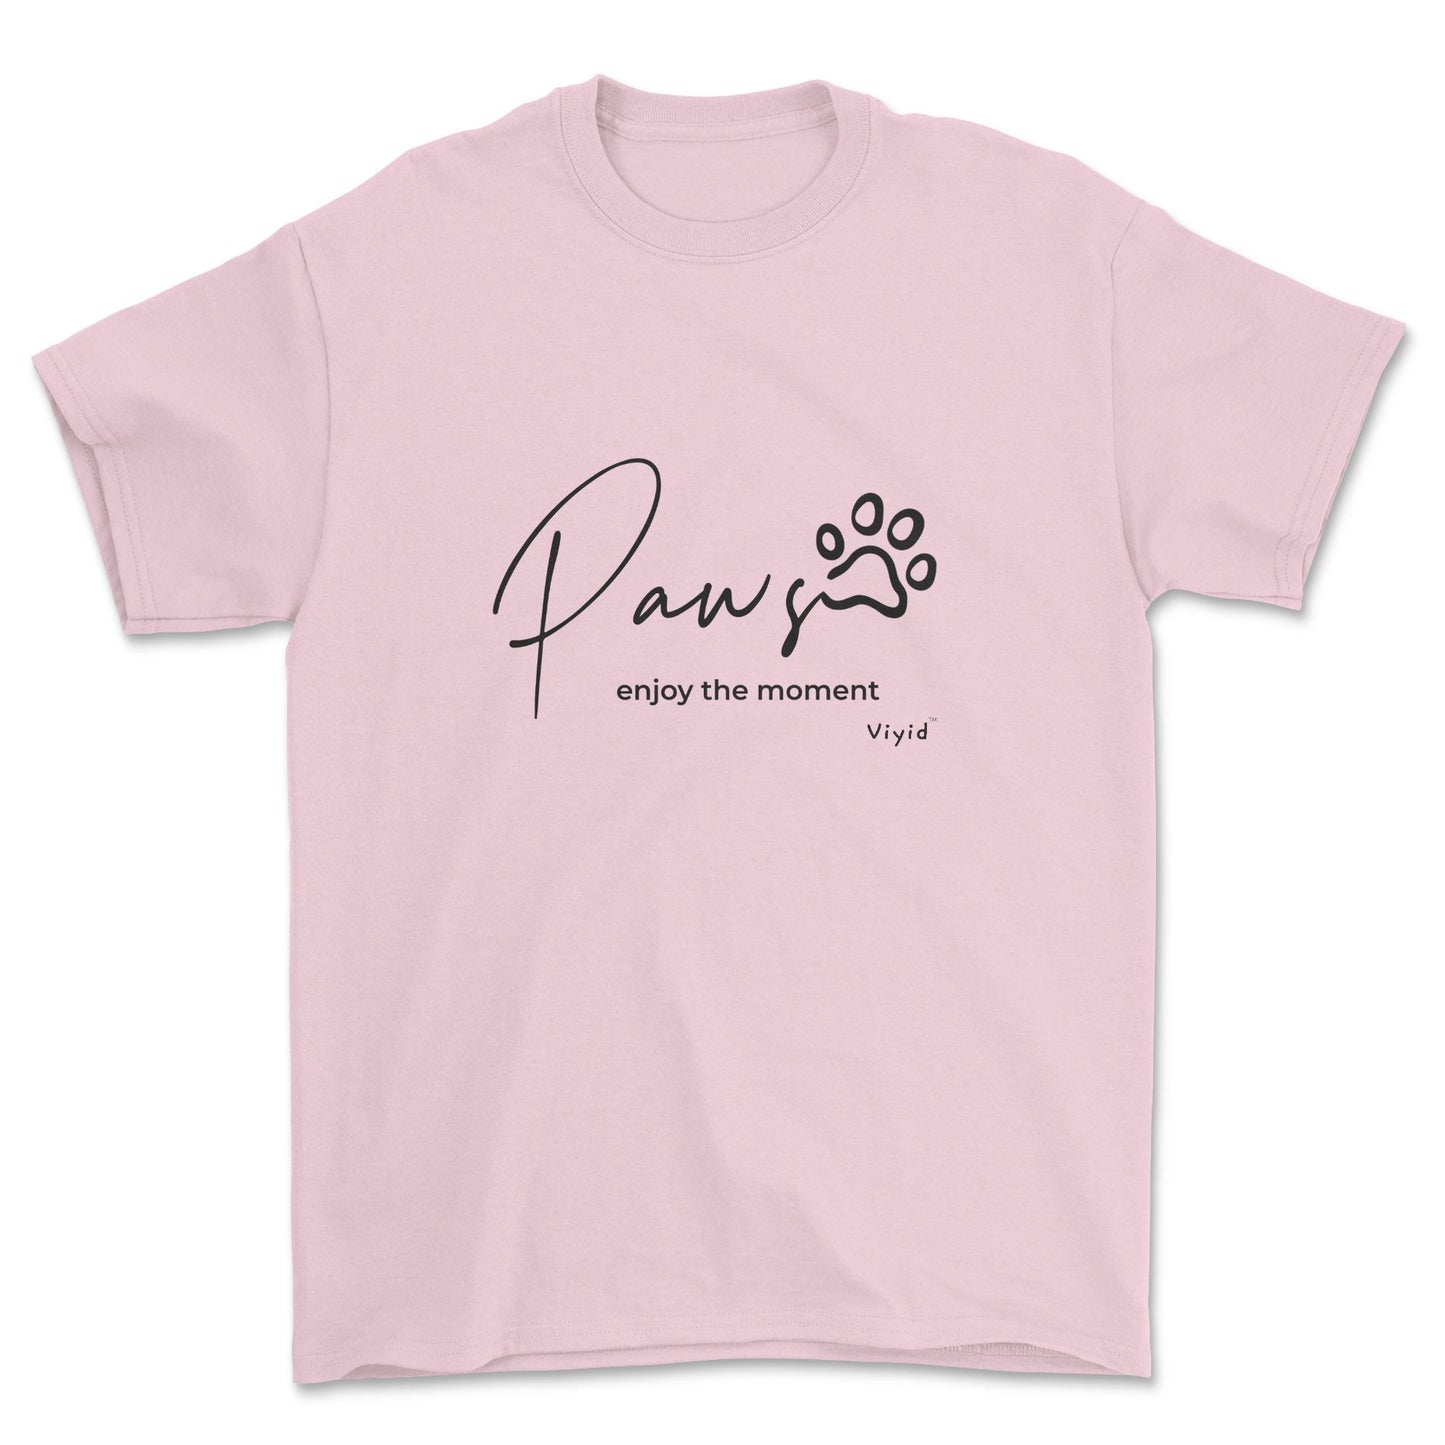 paws enjoy the moment youth t-shirt light pink